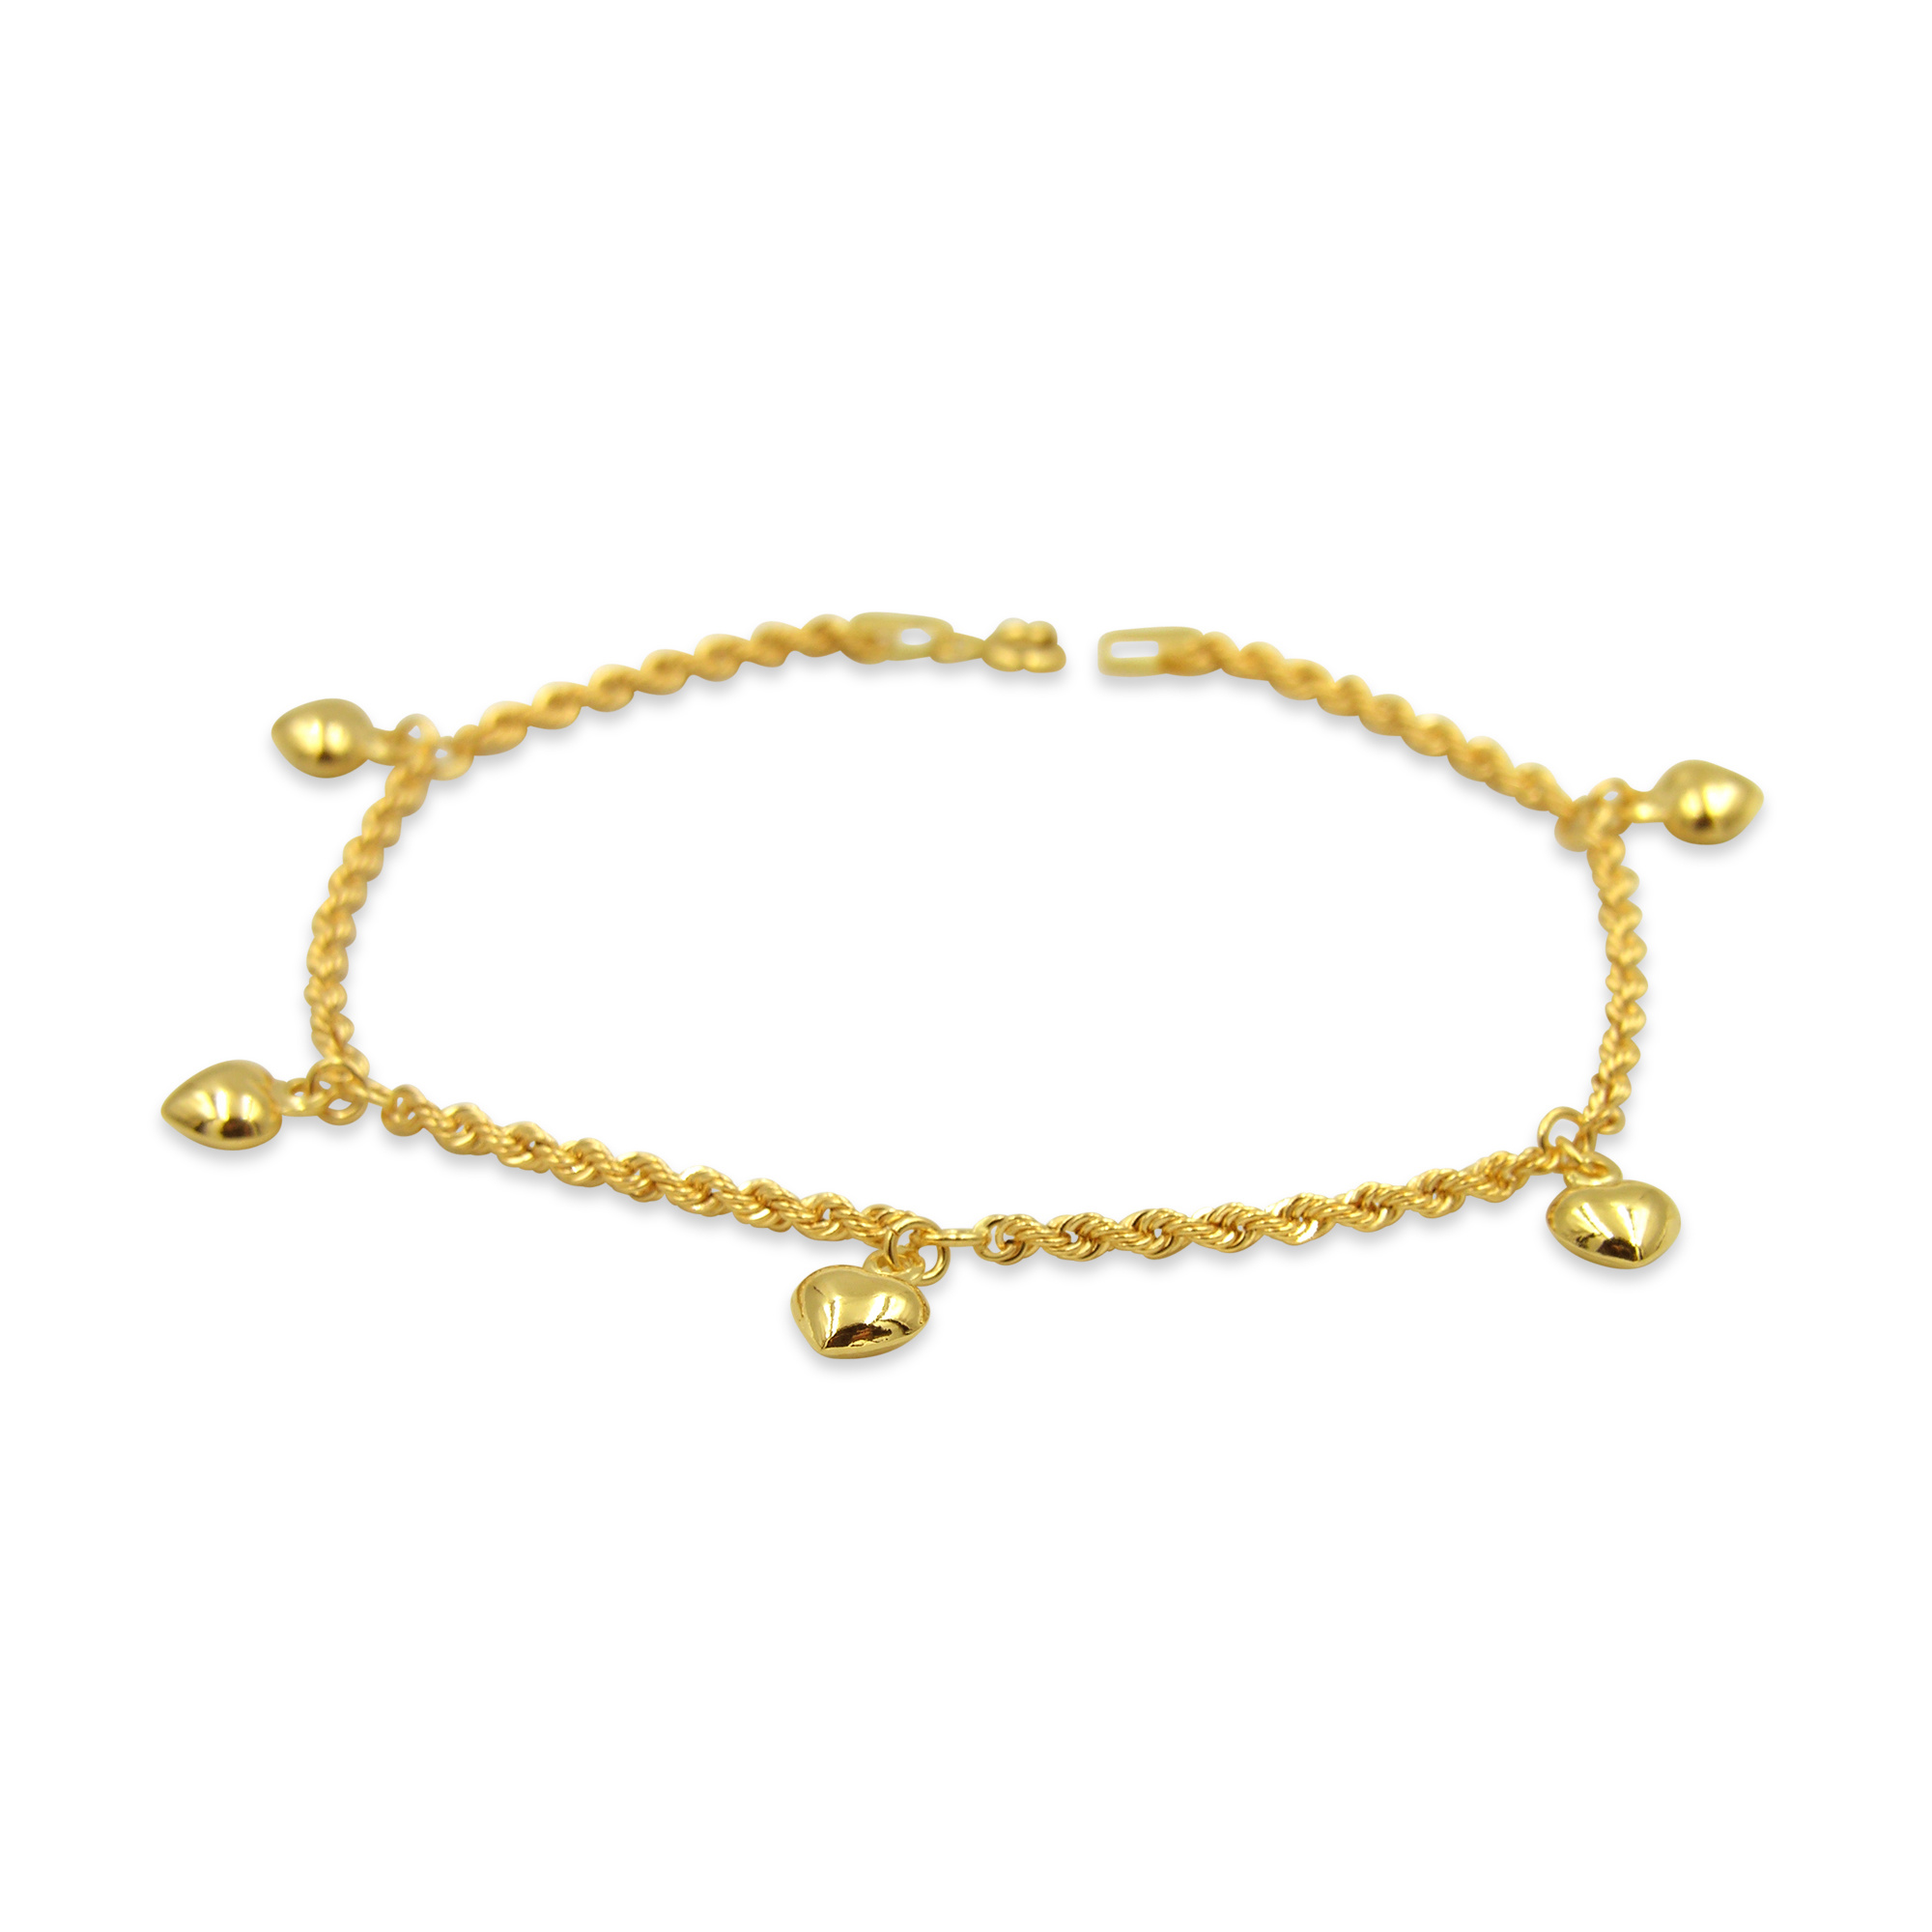 18 kt yellow gold rope charm bracelet with heart